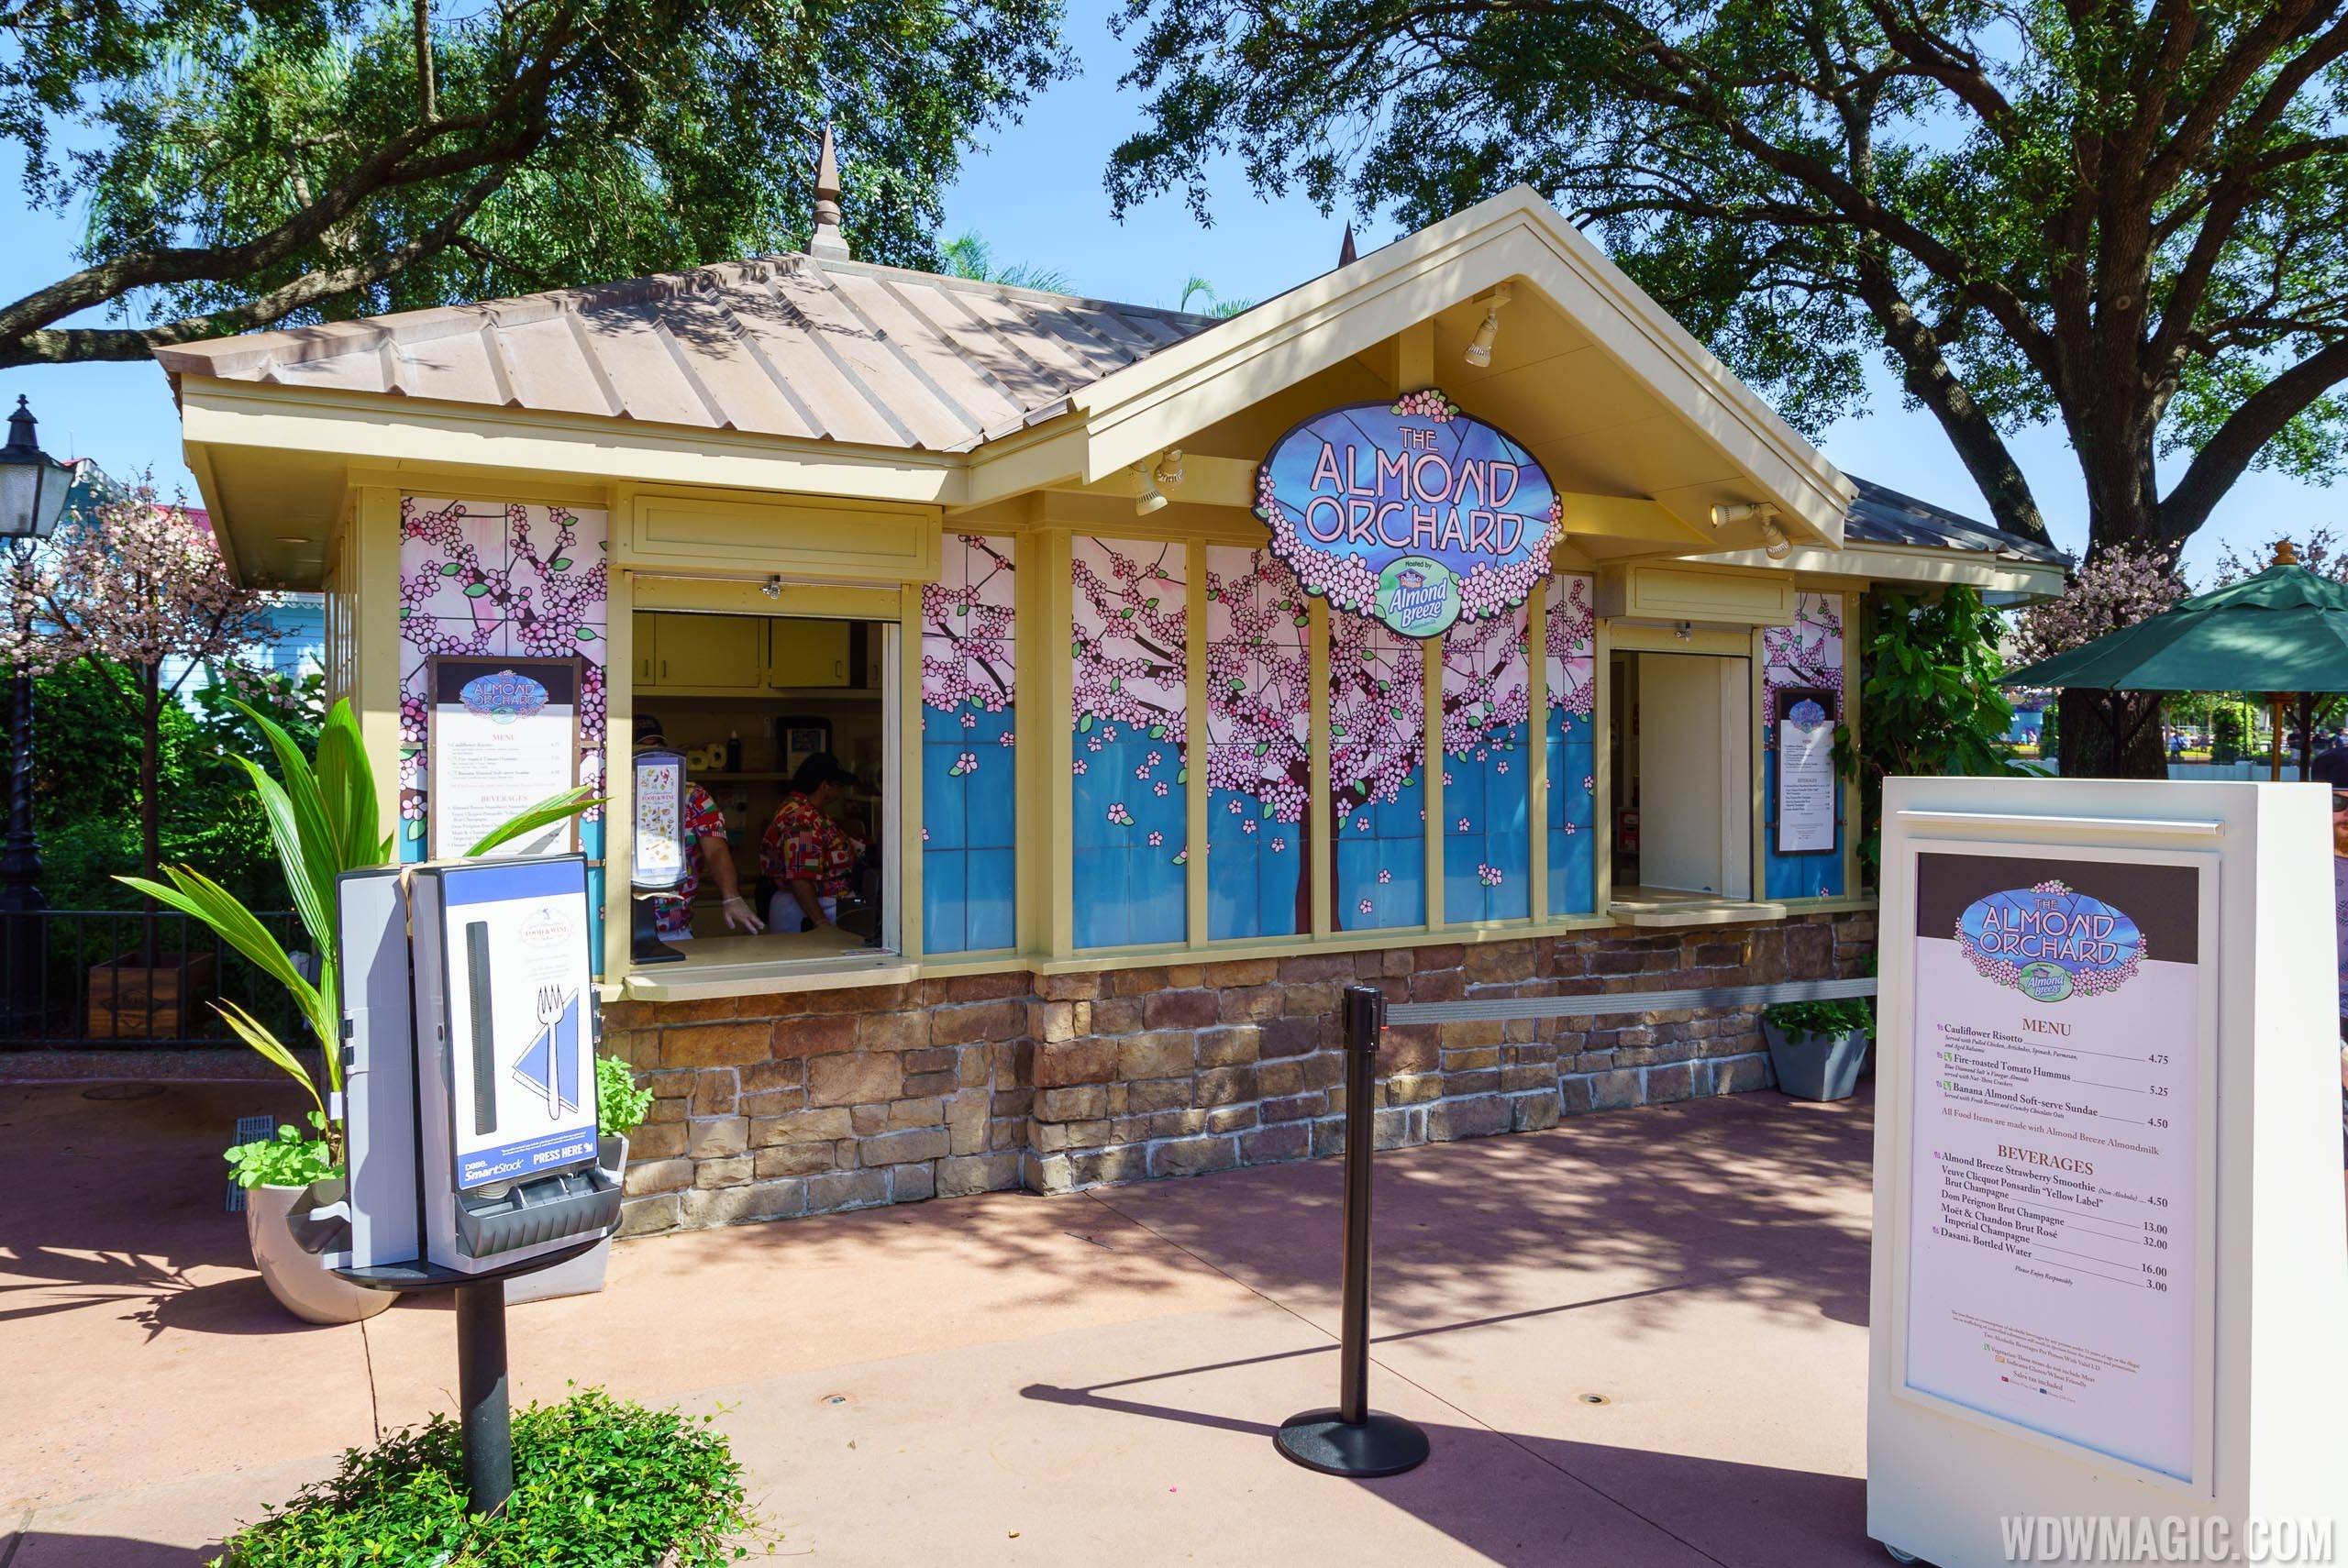 2017 Epcot Food and Wine Festival - The Almond Orchard marketplace kiosk